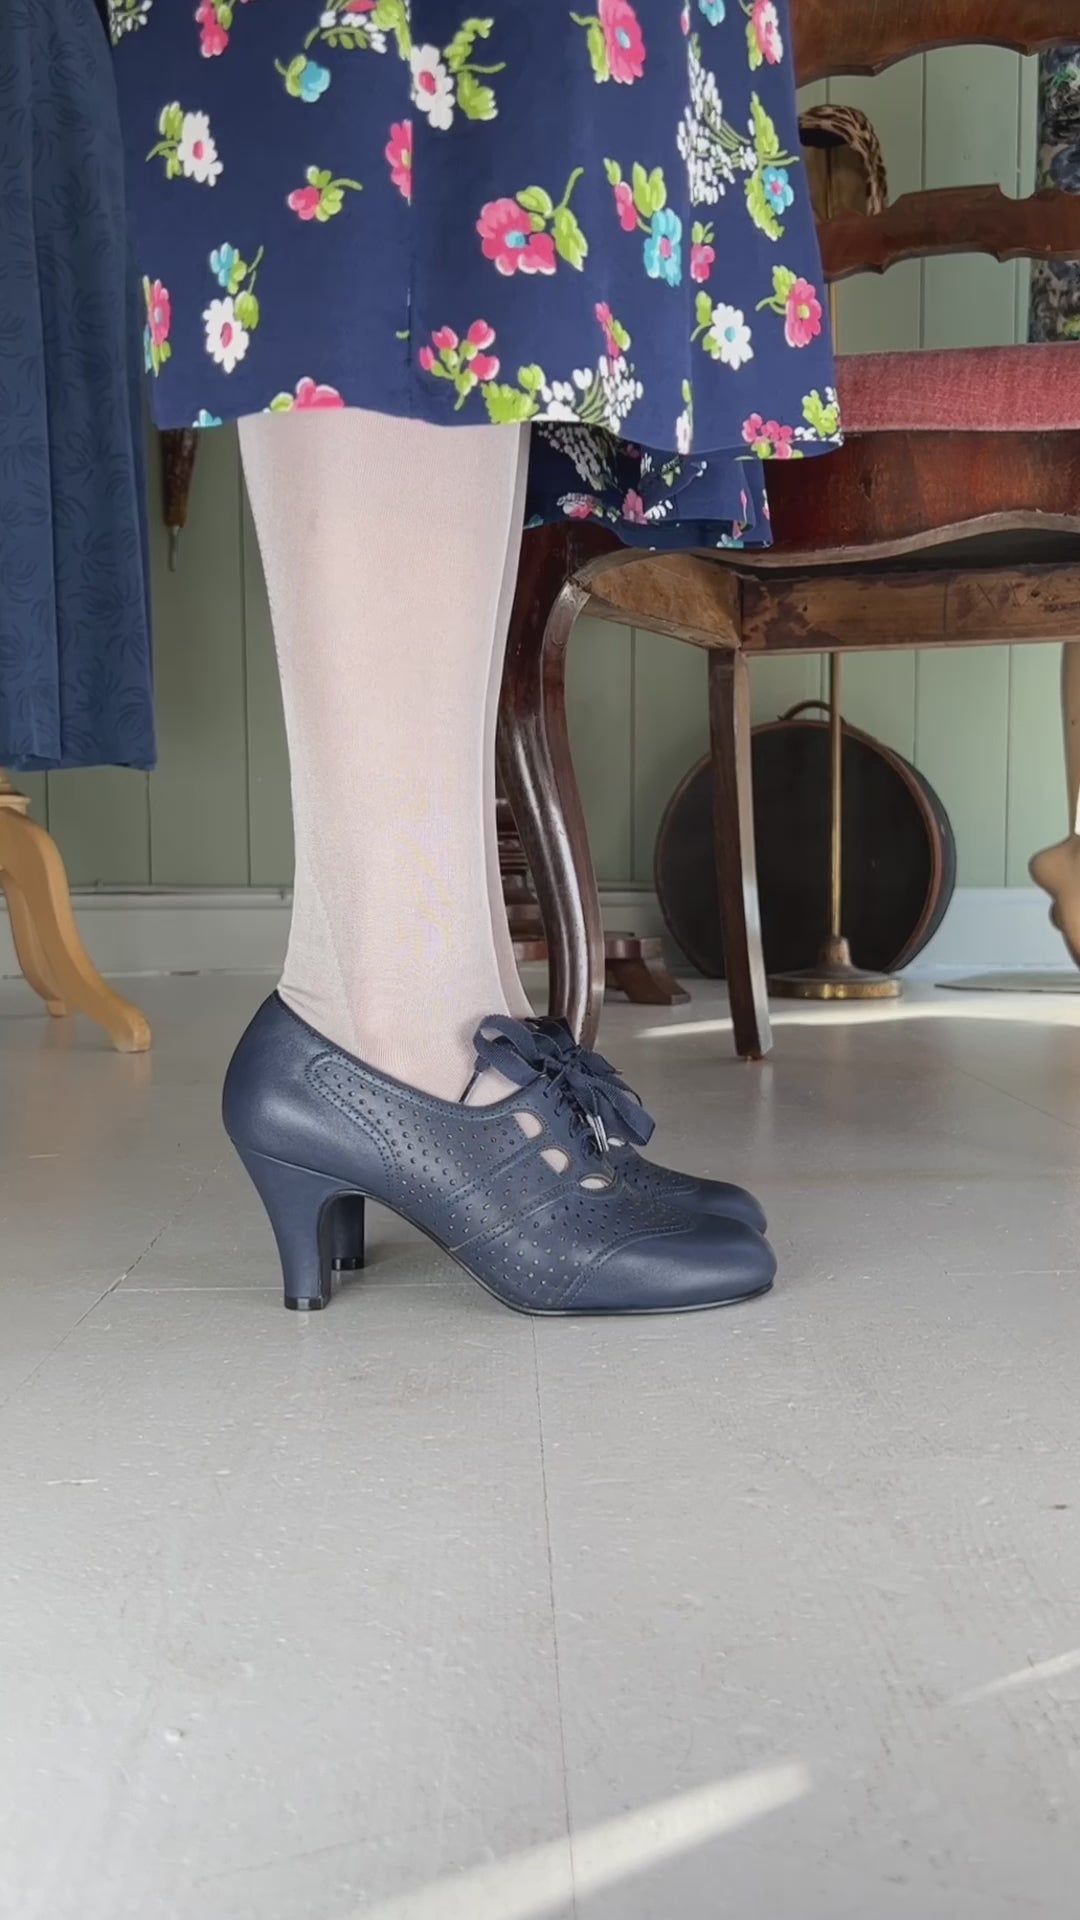 1930s everyday oxford high heel shoes - Marine Blue - Marie